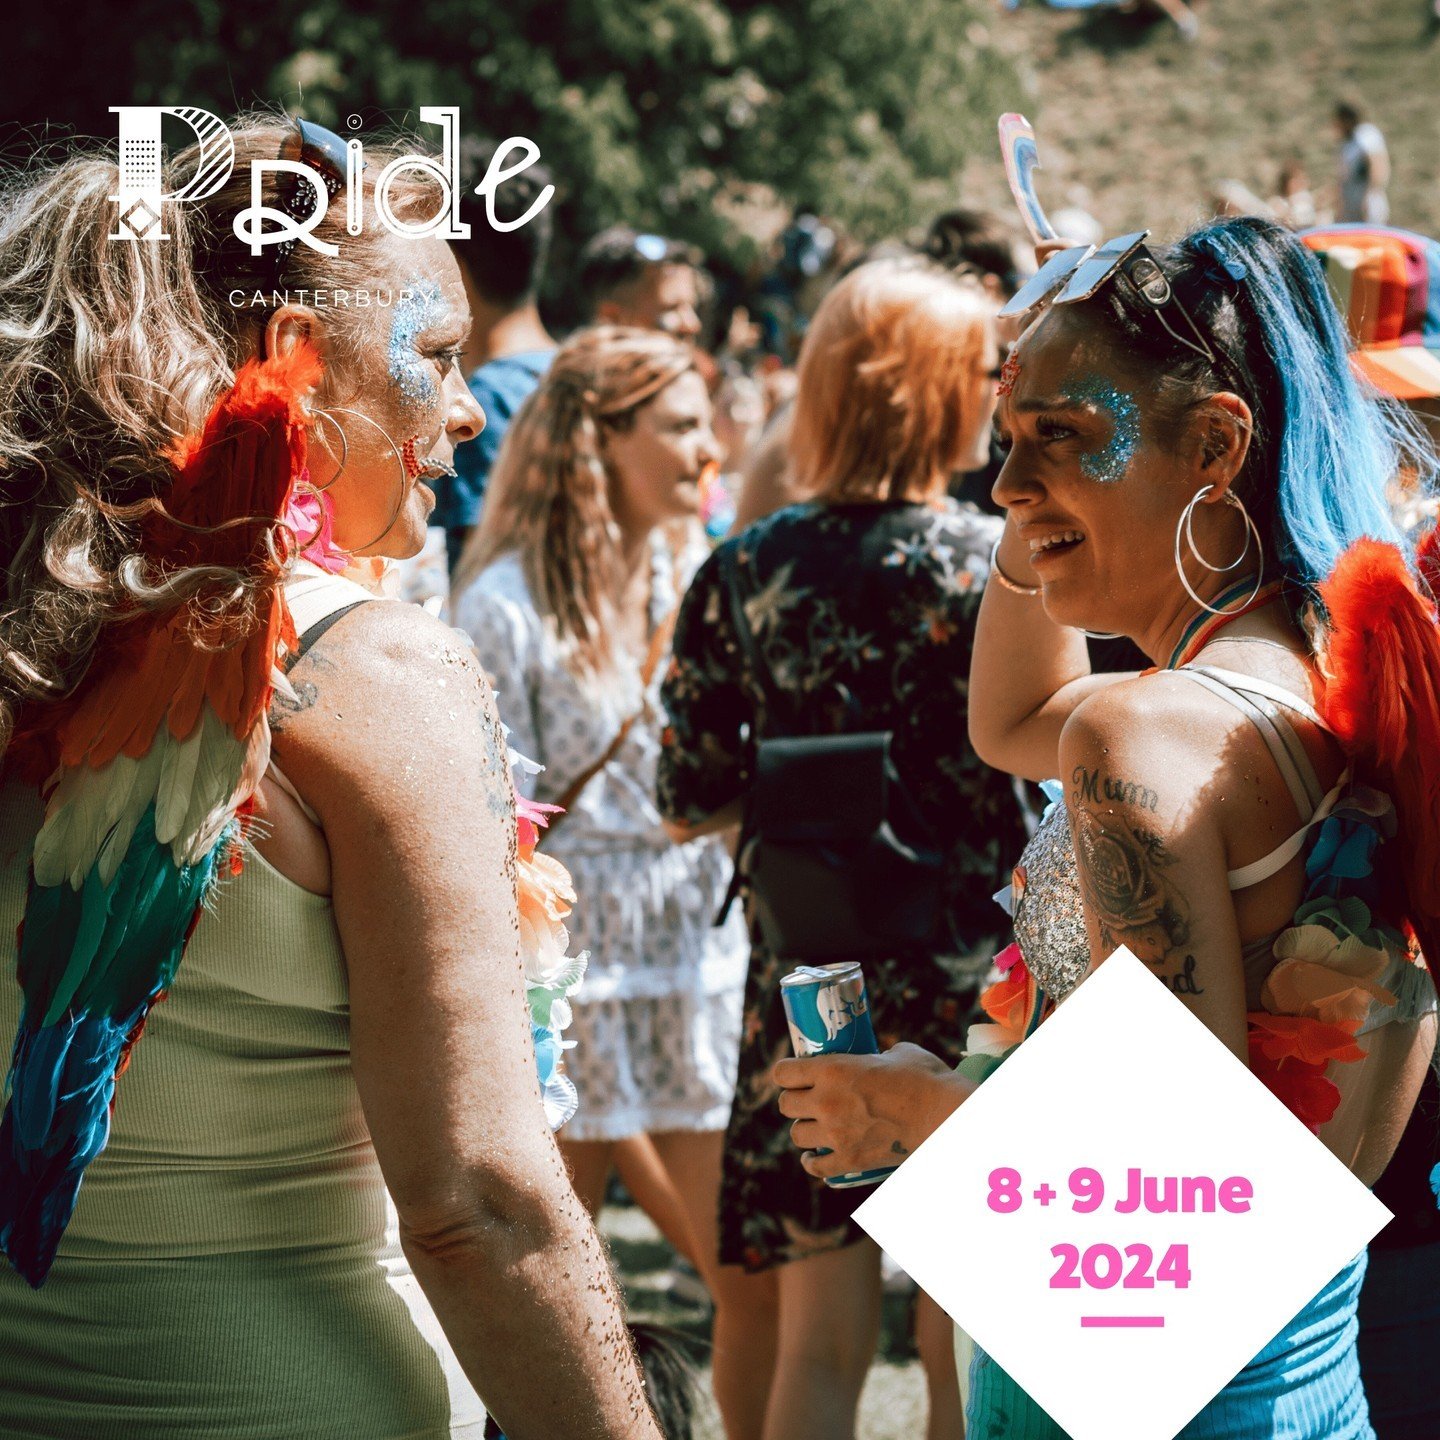 we're super excited to fill the city of Canterbury with love + pride once again 🌈 Sat 8th + Sun 9th June 2024 🥰